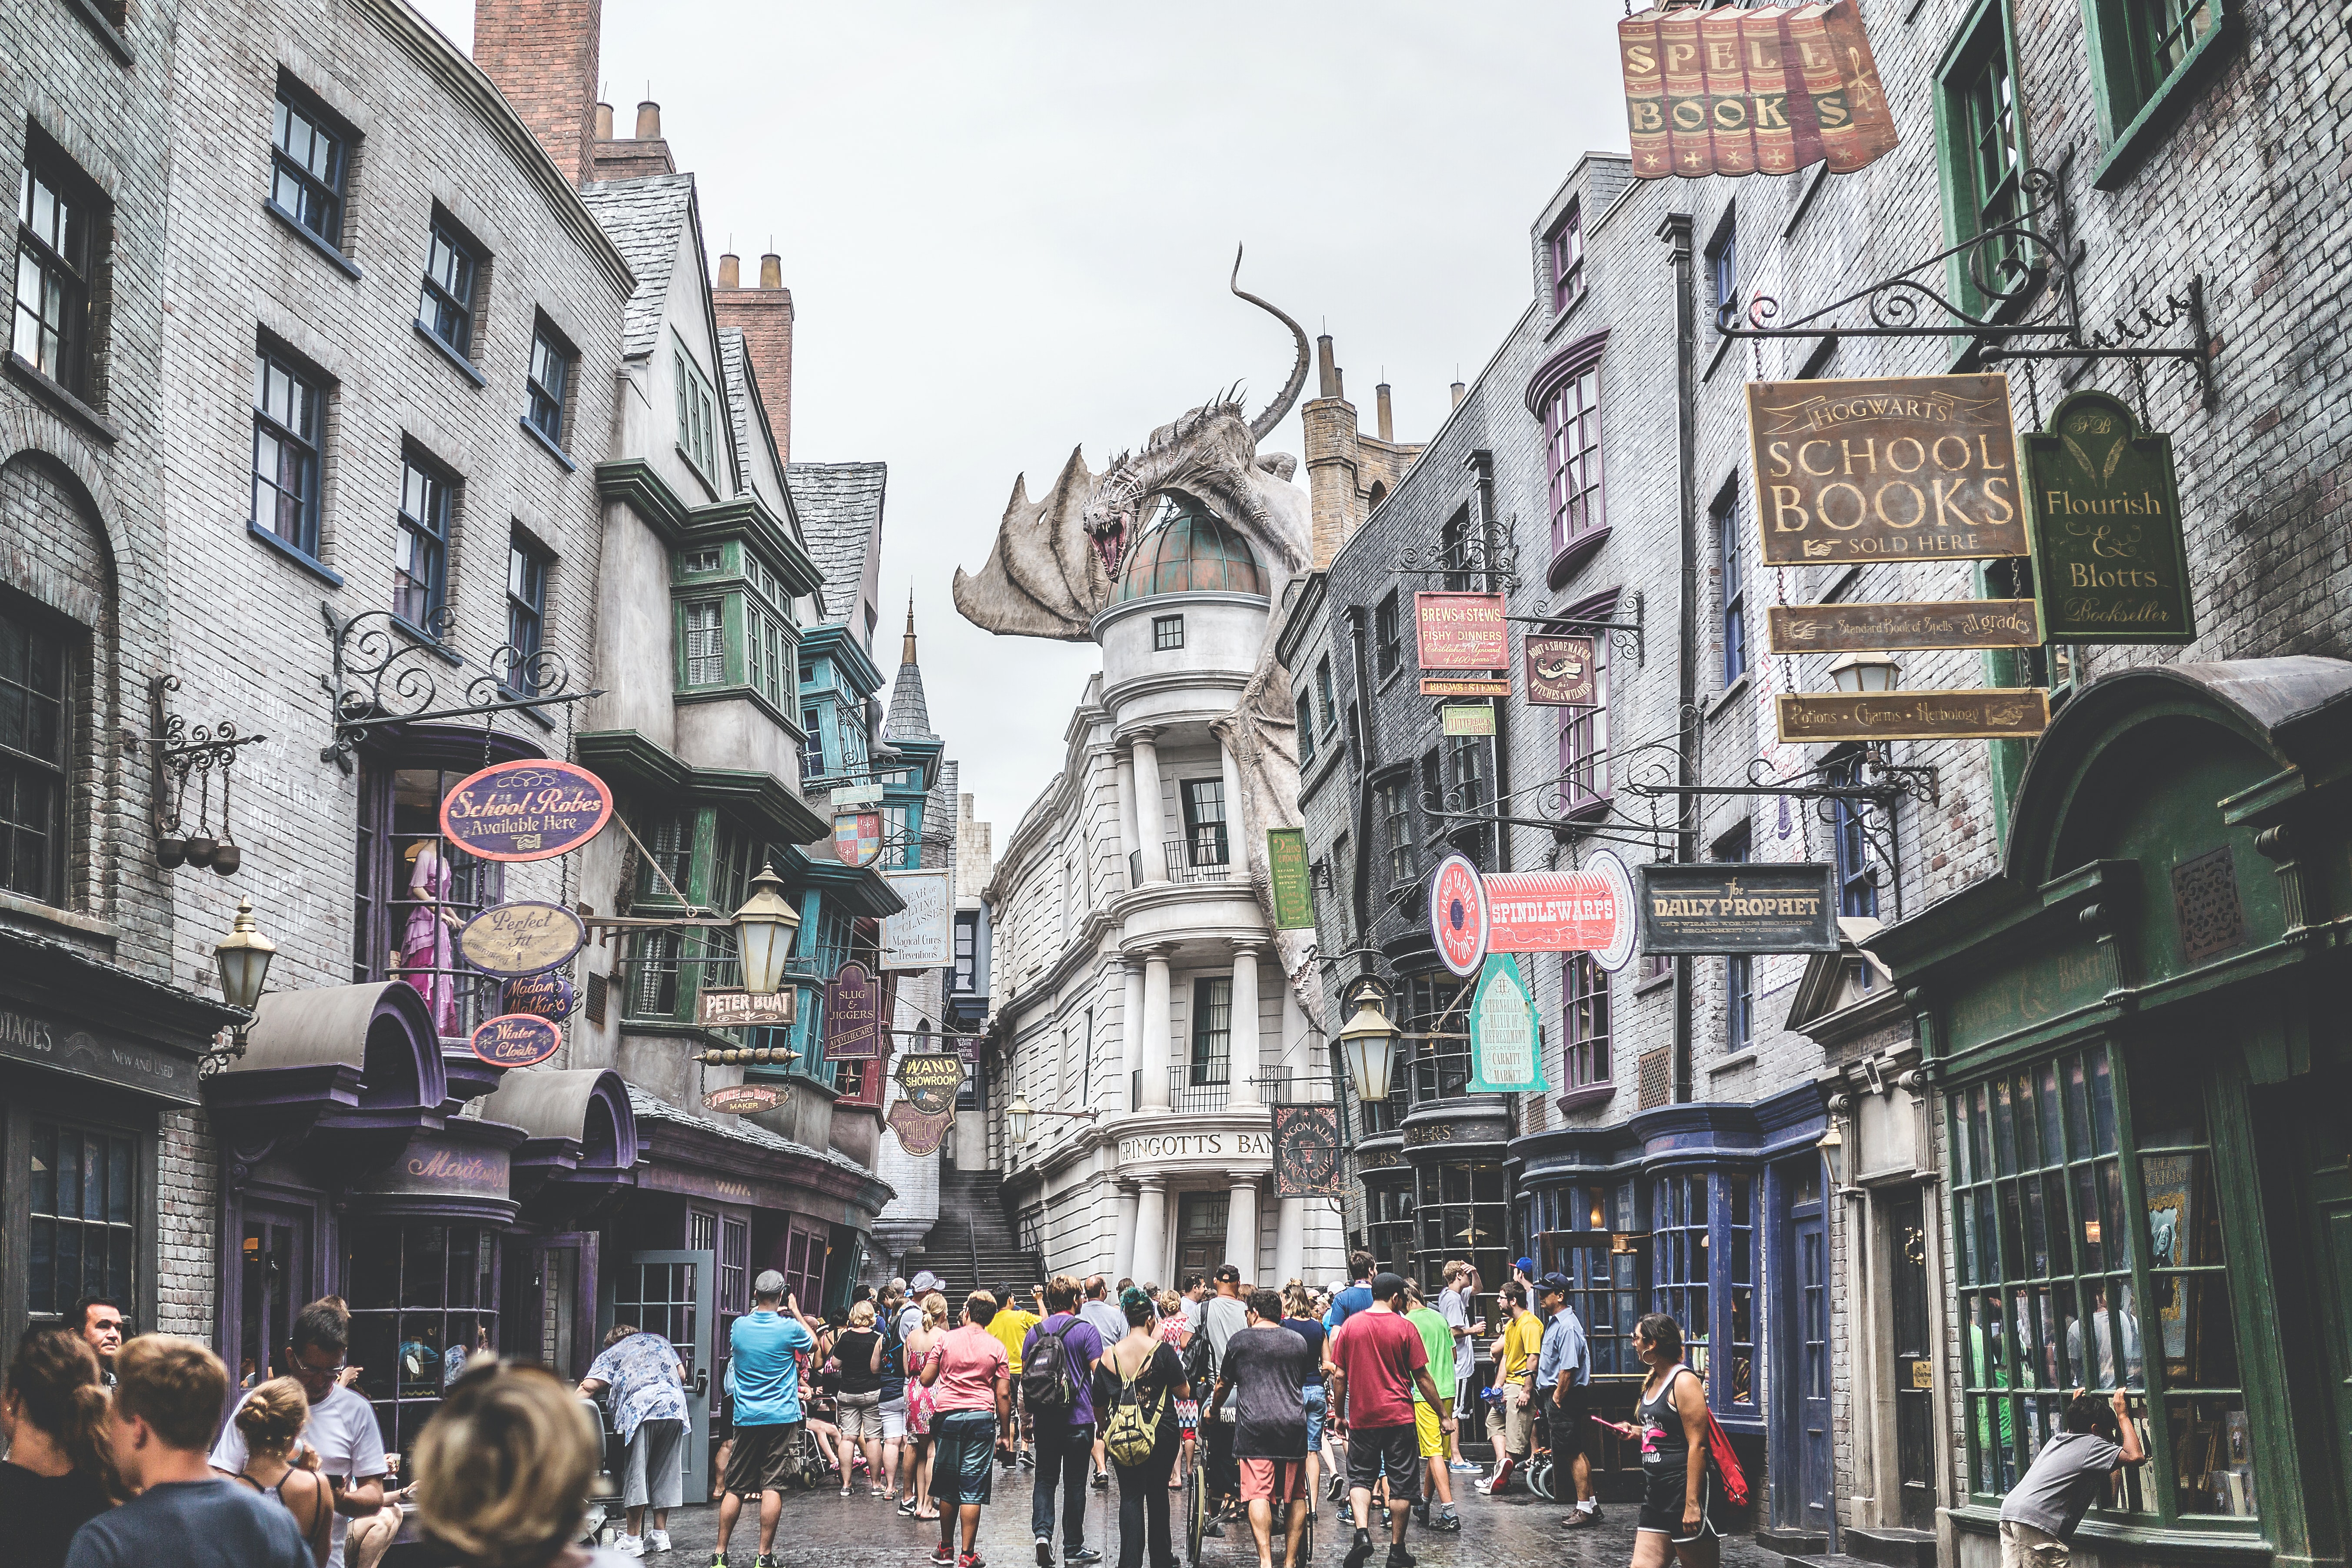 Click here for Universal Studios tips that you won't want to miss when planning your first visit; from Top US Family Travel Blog, Travel With A Plan!